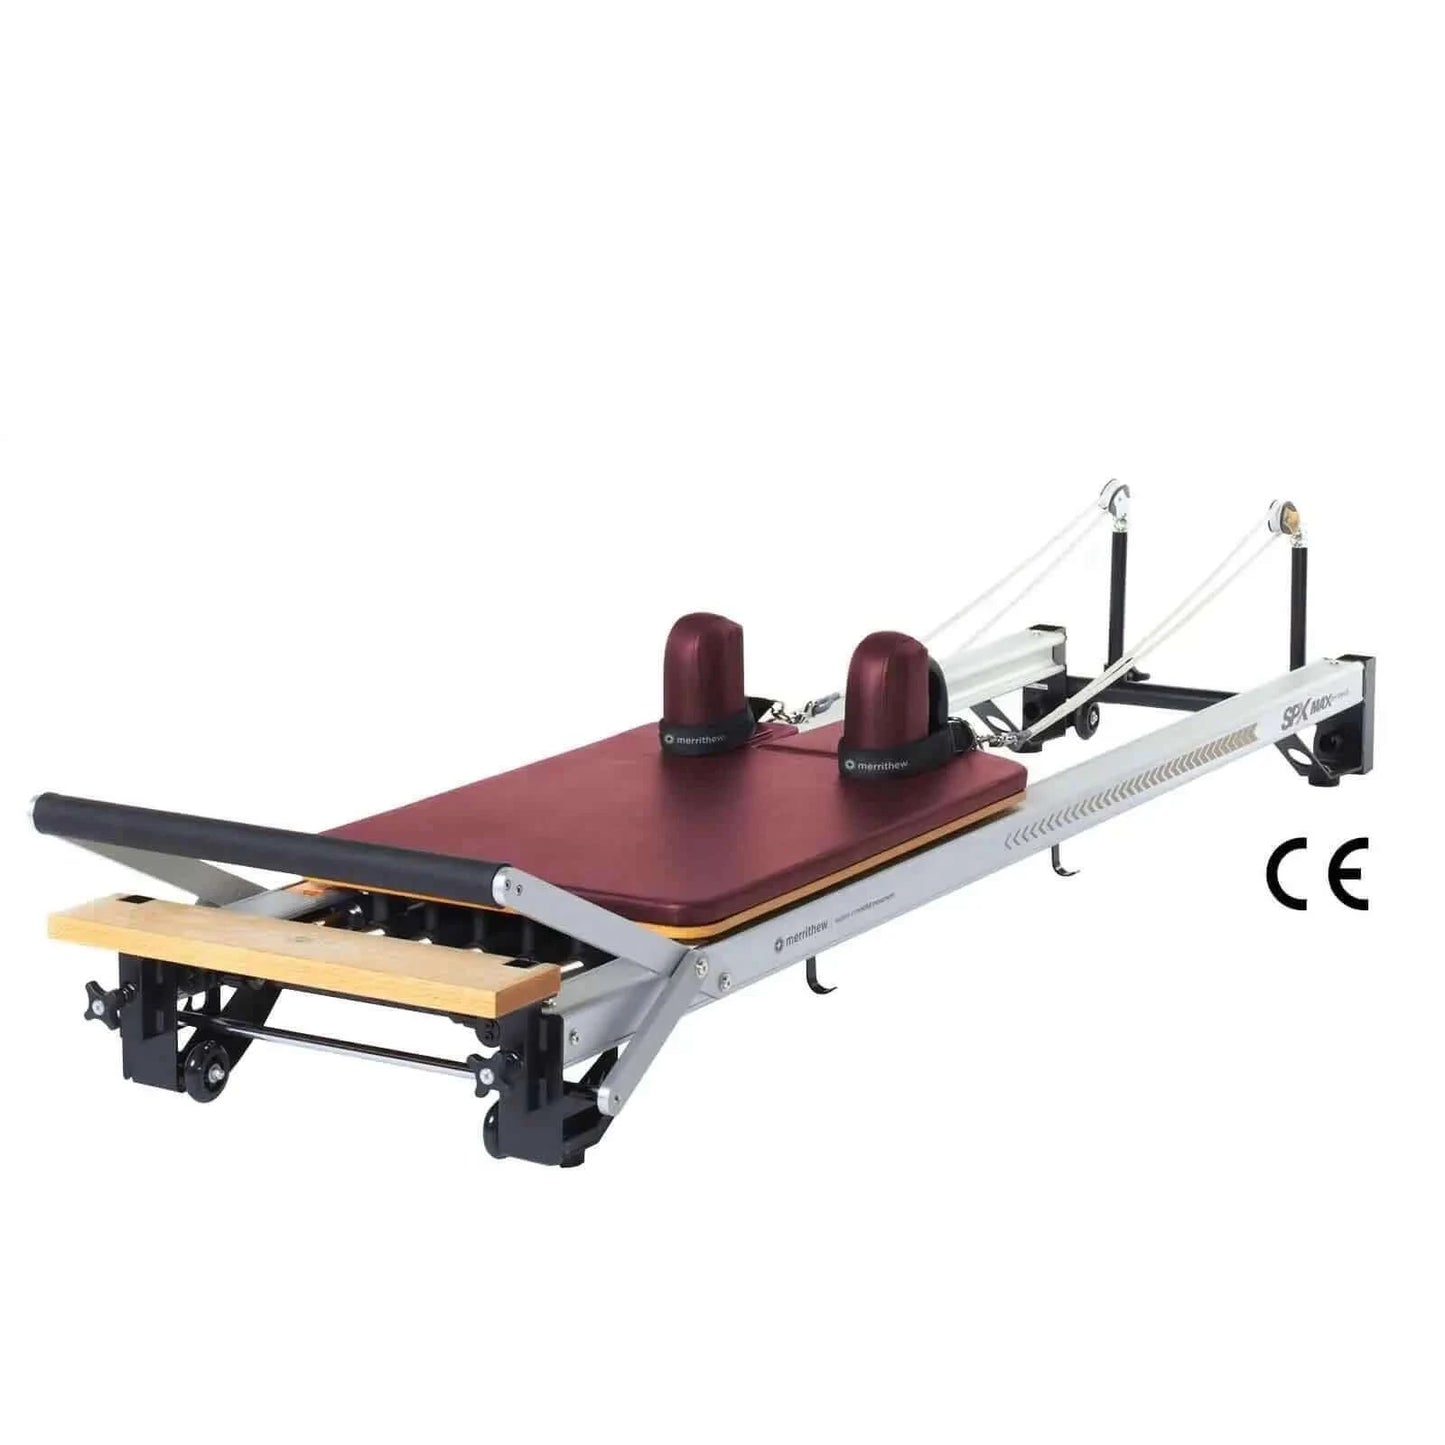 Red Truffle Merrithew™ Pilates Reformer Extension Upgrade · SPX® Max by Merrithew™ sold by Pilates Matters® by BSP LLC